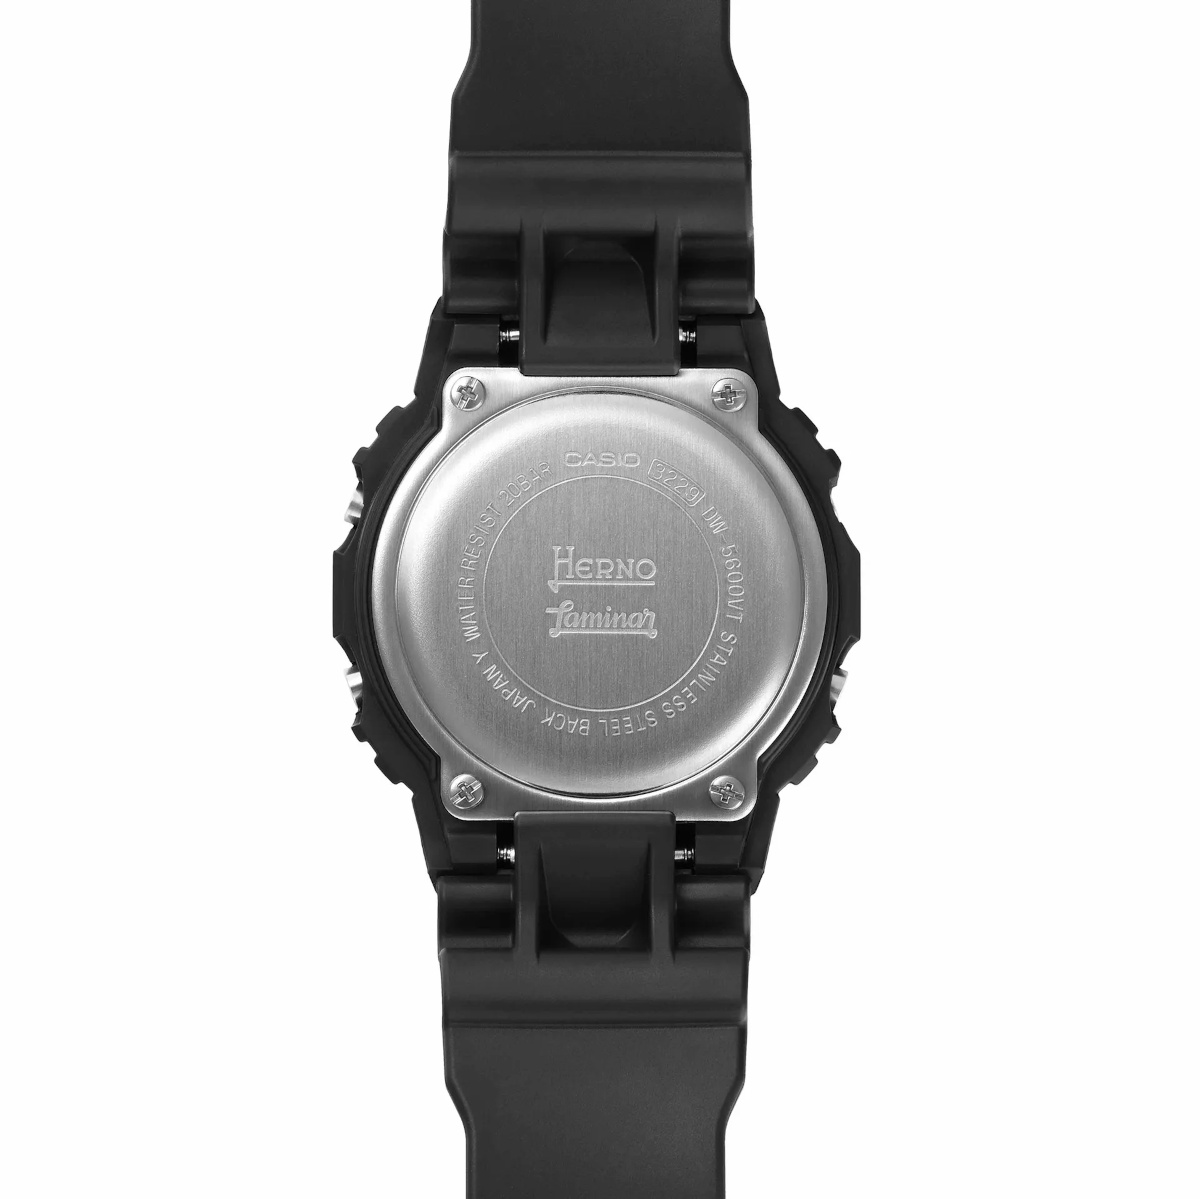 Herno Laminar x G-Shock DW-5600 for 10th anniversary of Herno Aoyama